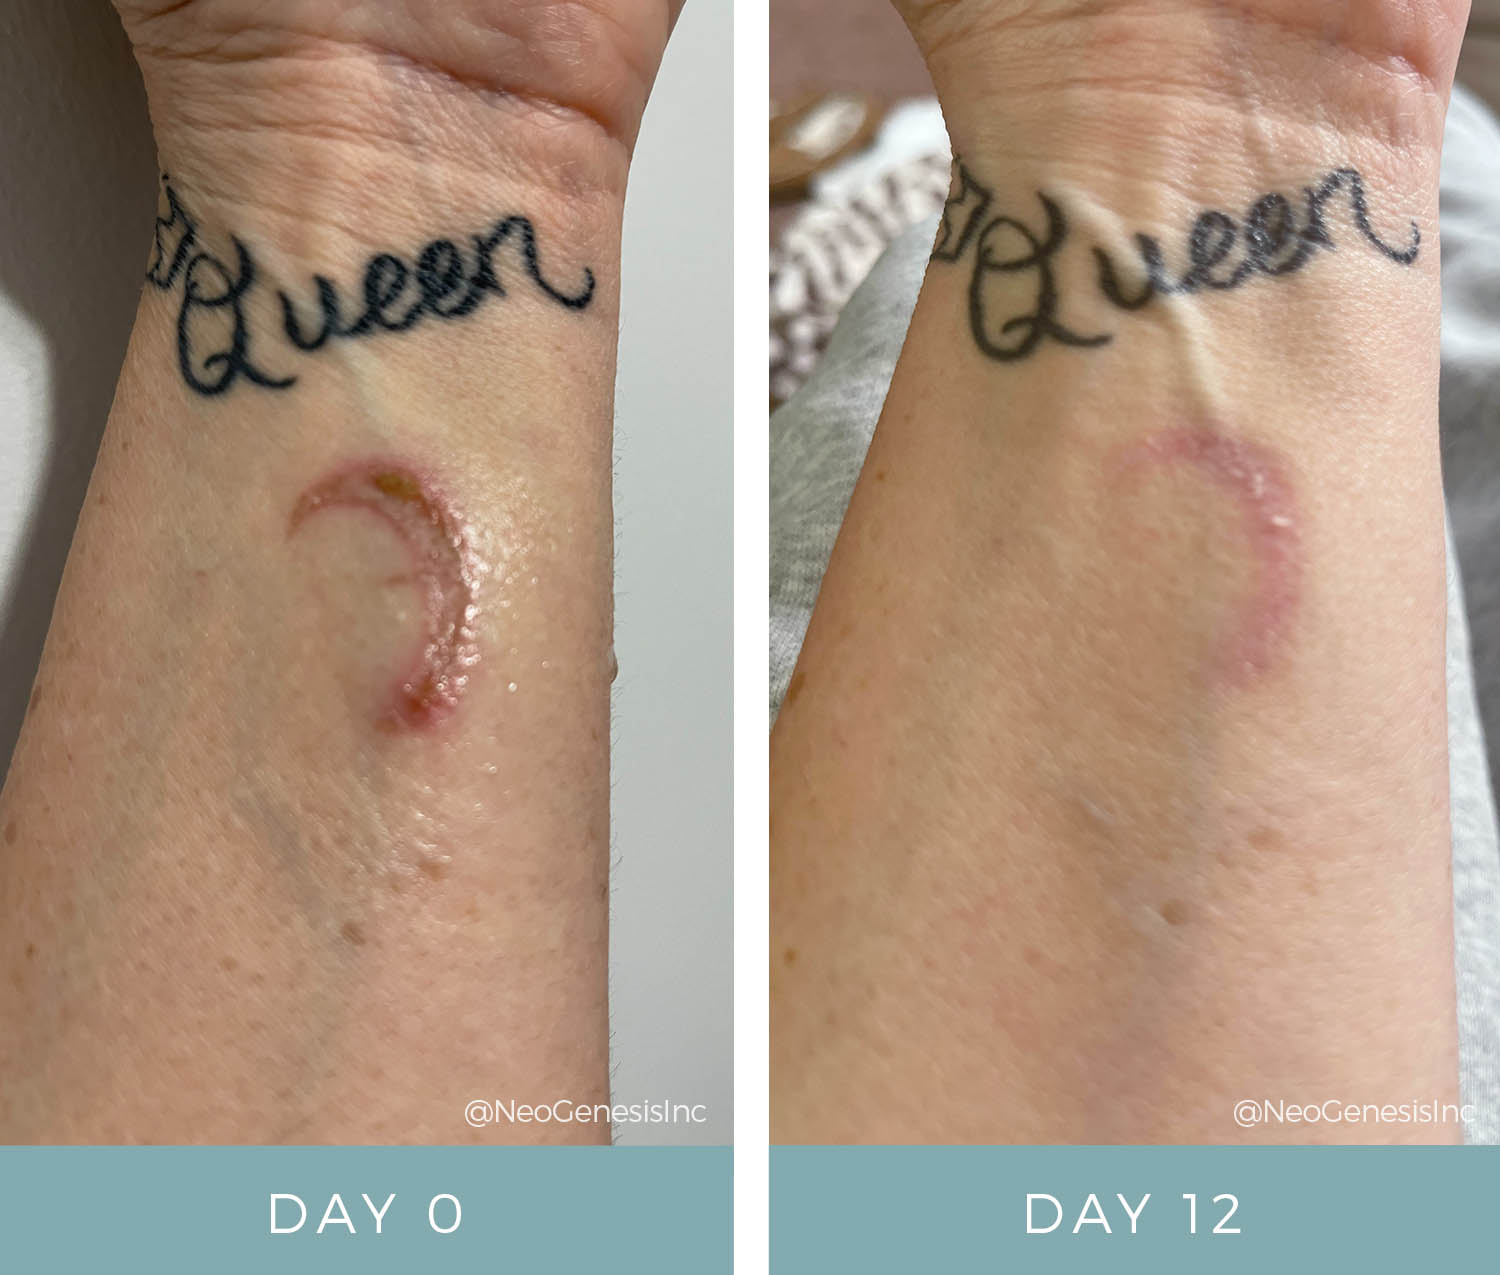 Before + After - Arm Burn